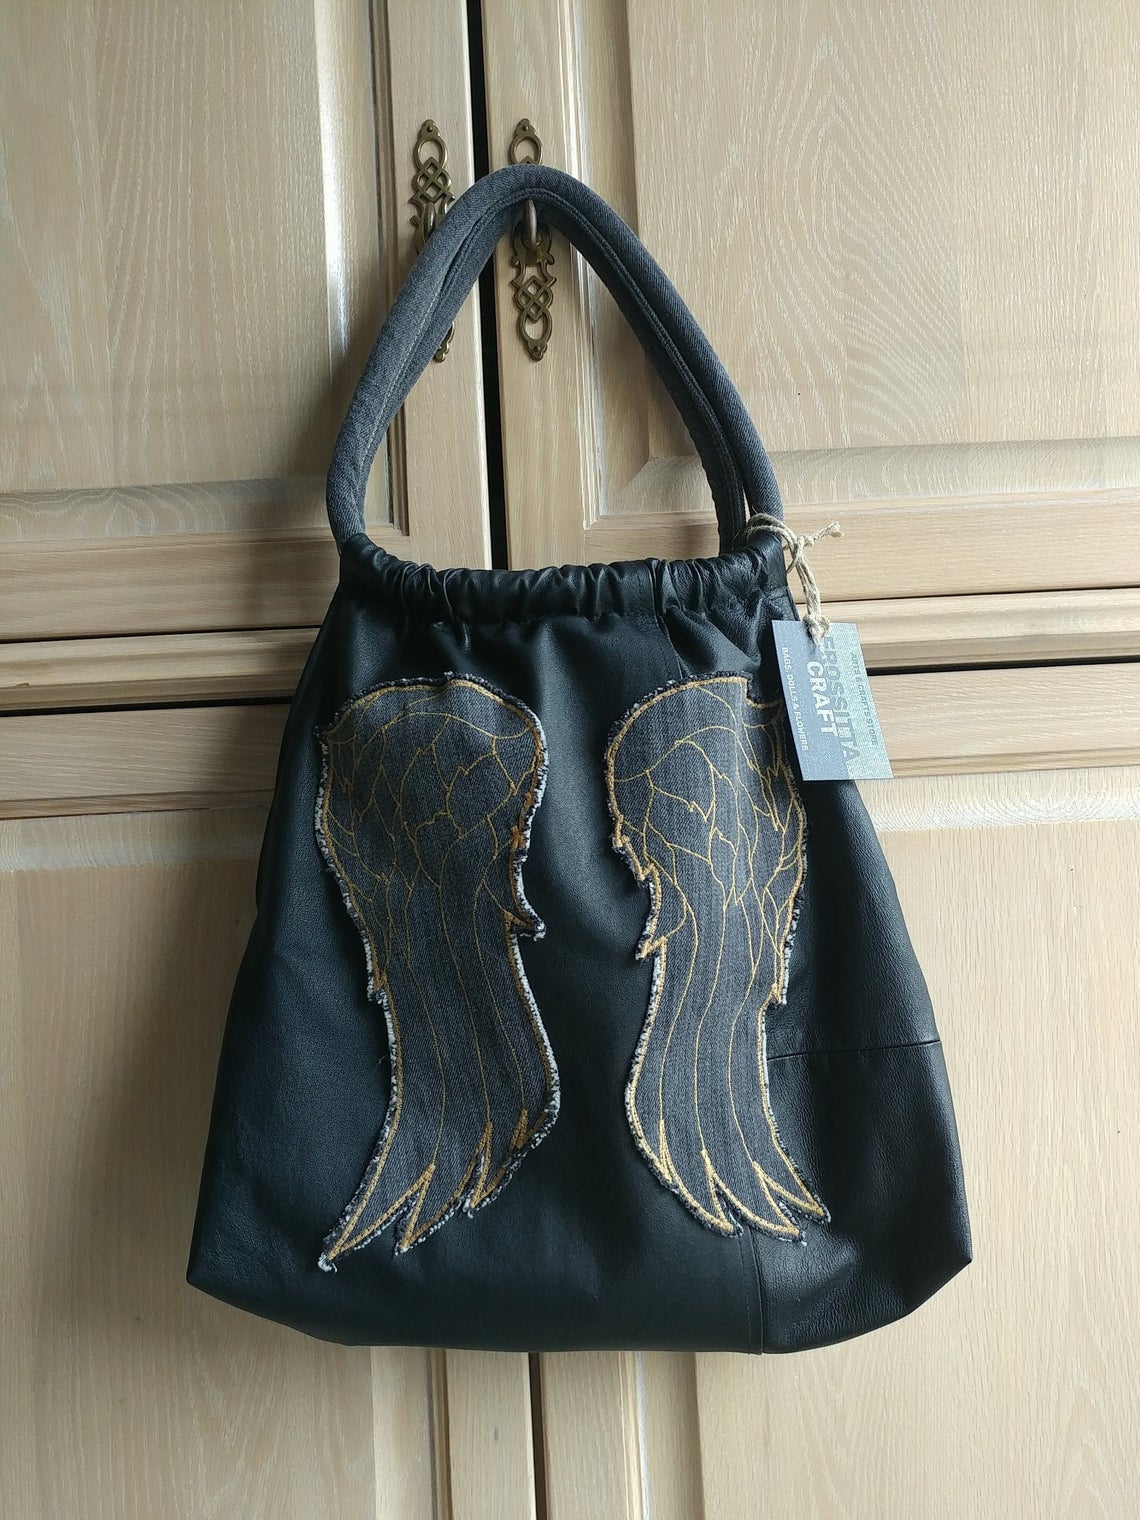 Black genuine leather tote bag with gray wings